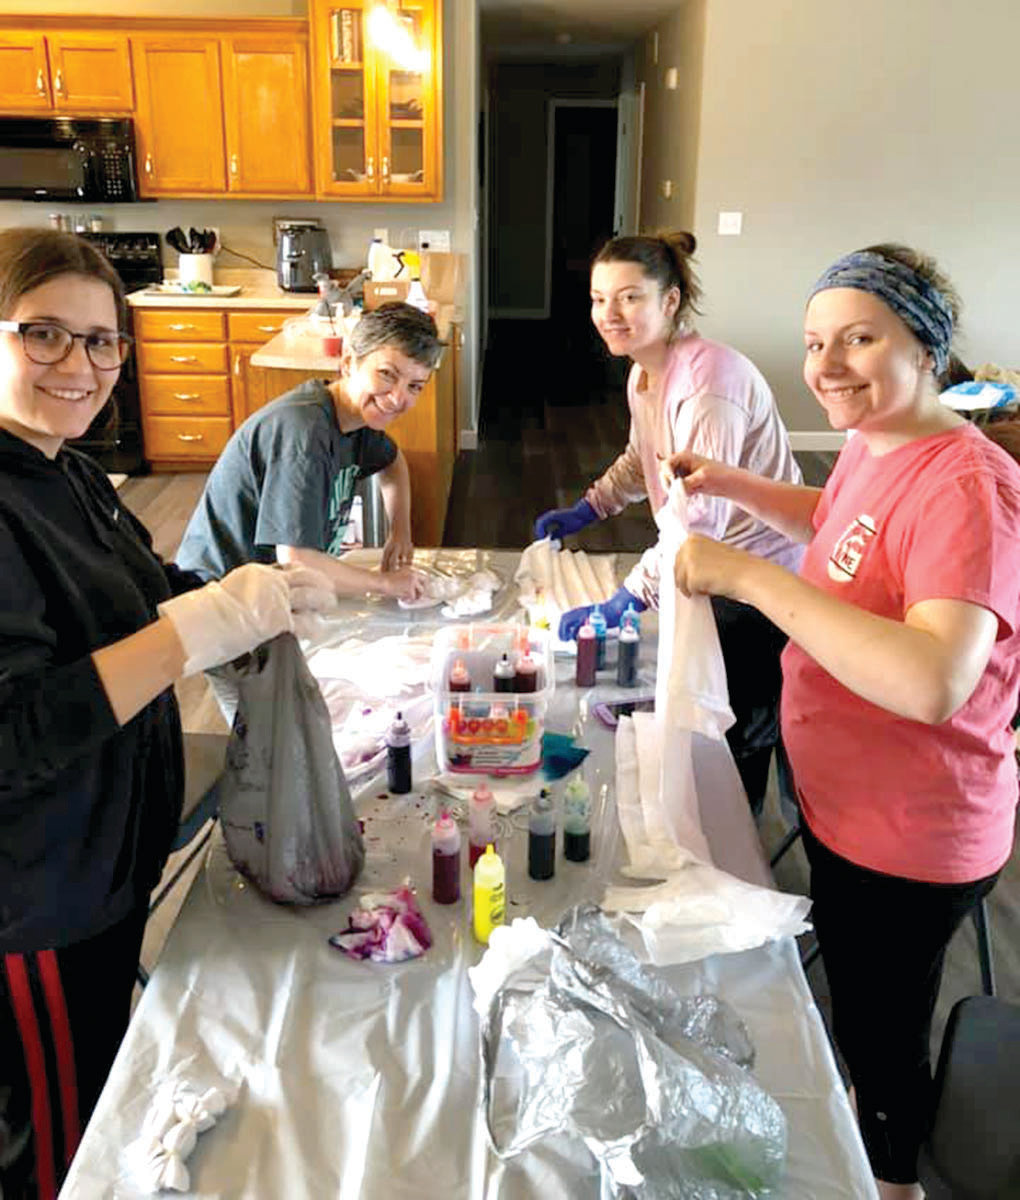 Sherry Cleveland, Shelby Cleveland, Savannah Cleveland and Arianna Cingolani tie-dye some new shirts. Not pictured is Frances Boswell.